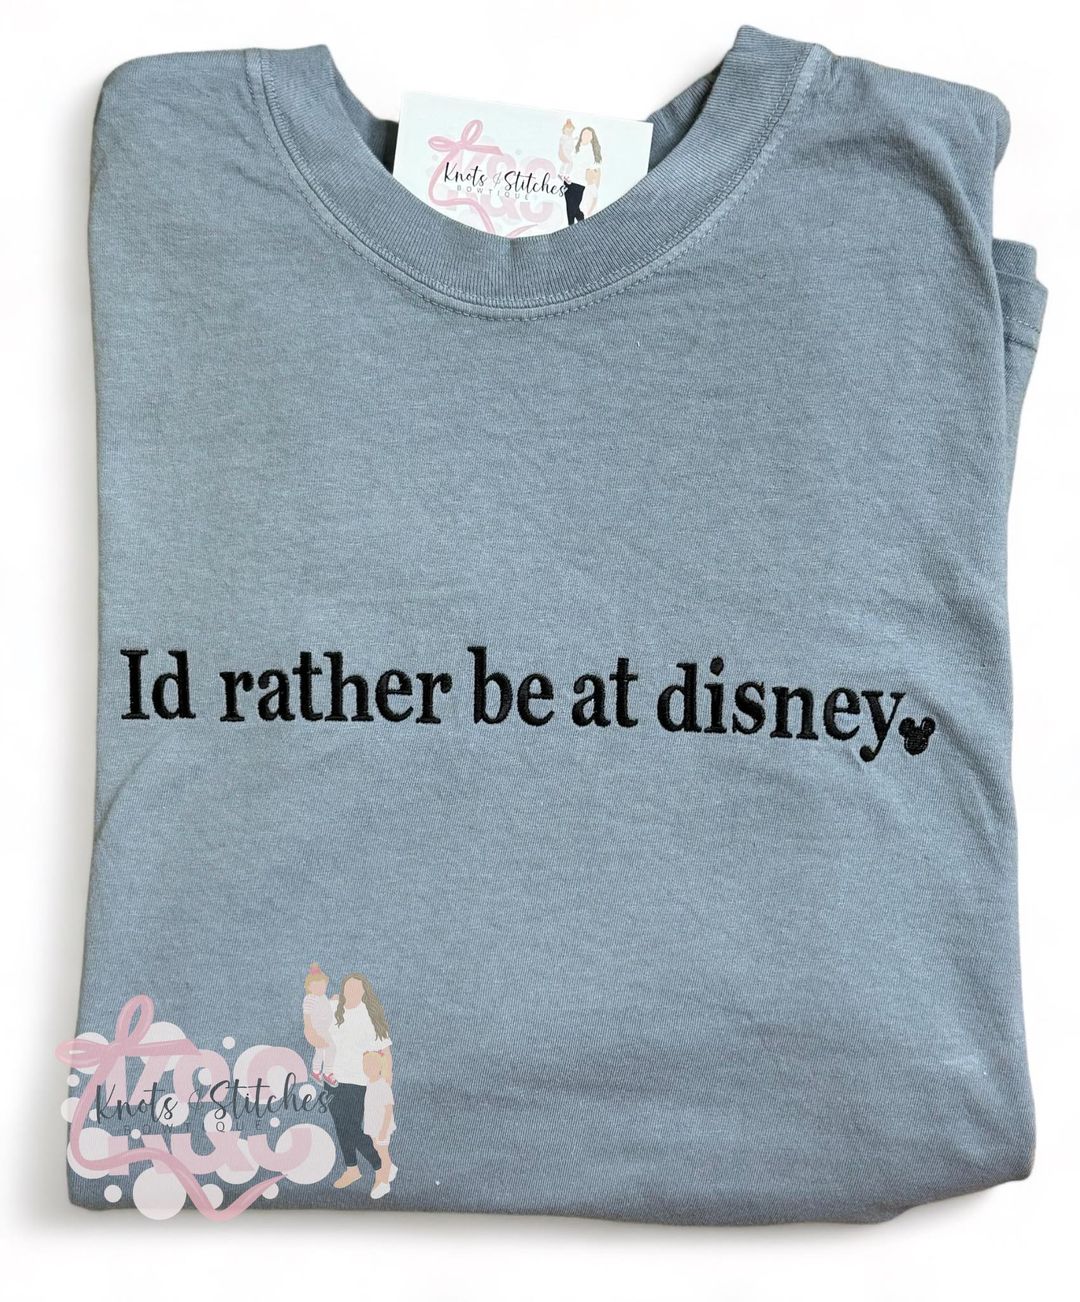 I'd rather be at Disney tee